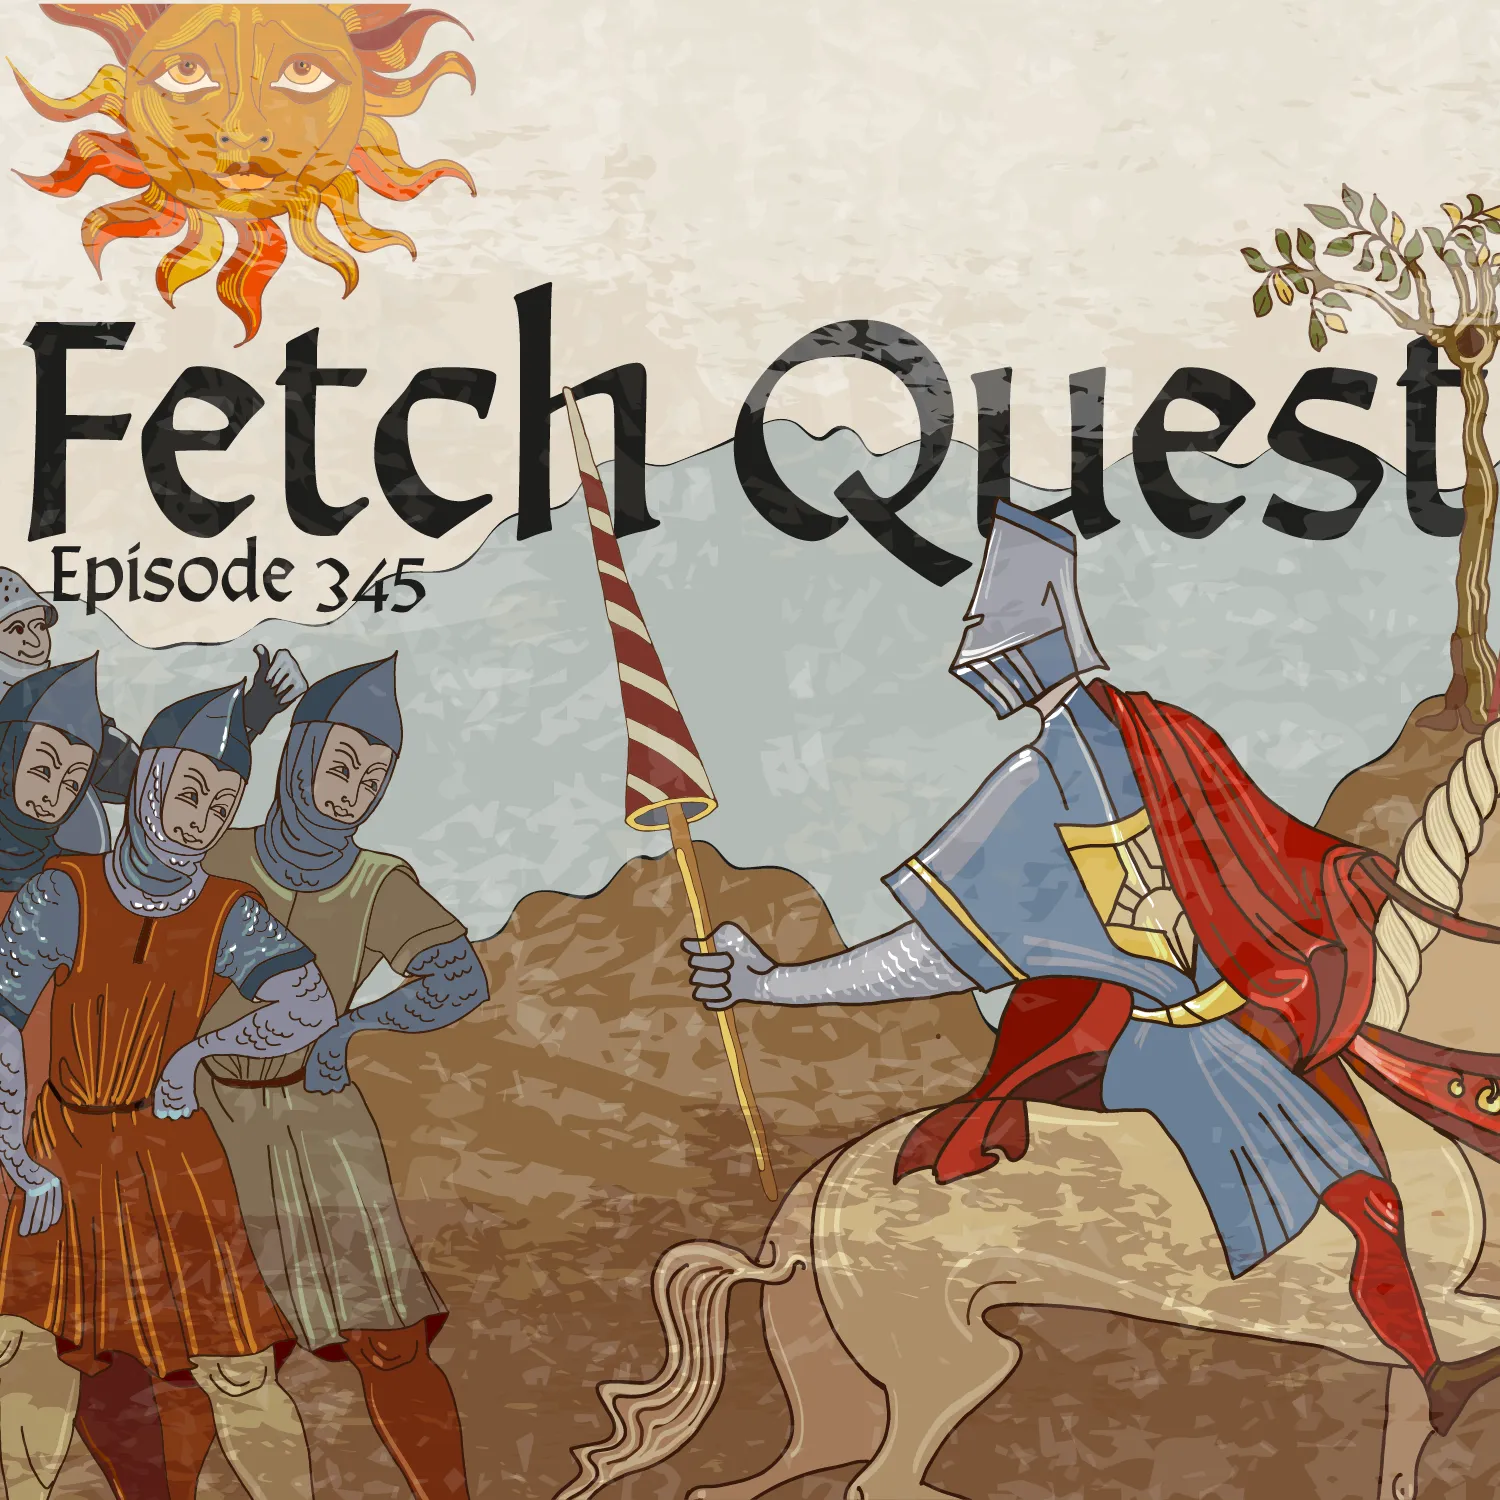 A medieval-themed illustration titled "Fetch Quest" with "Episode 345" below. The image features a knight in blue armor with a red cape on a horse, holding a lance with a striped flag. He is looking back at a group of three soldiers in chainmail armor, all smirking. In the background, there's a stylized sun with a face, and a barren landscape with a few leafy branches in the foreground. The artwork has a hand-drawn, storybook quality, with a warm color palette of browns, blues, and reds.